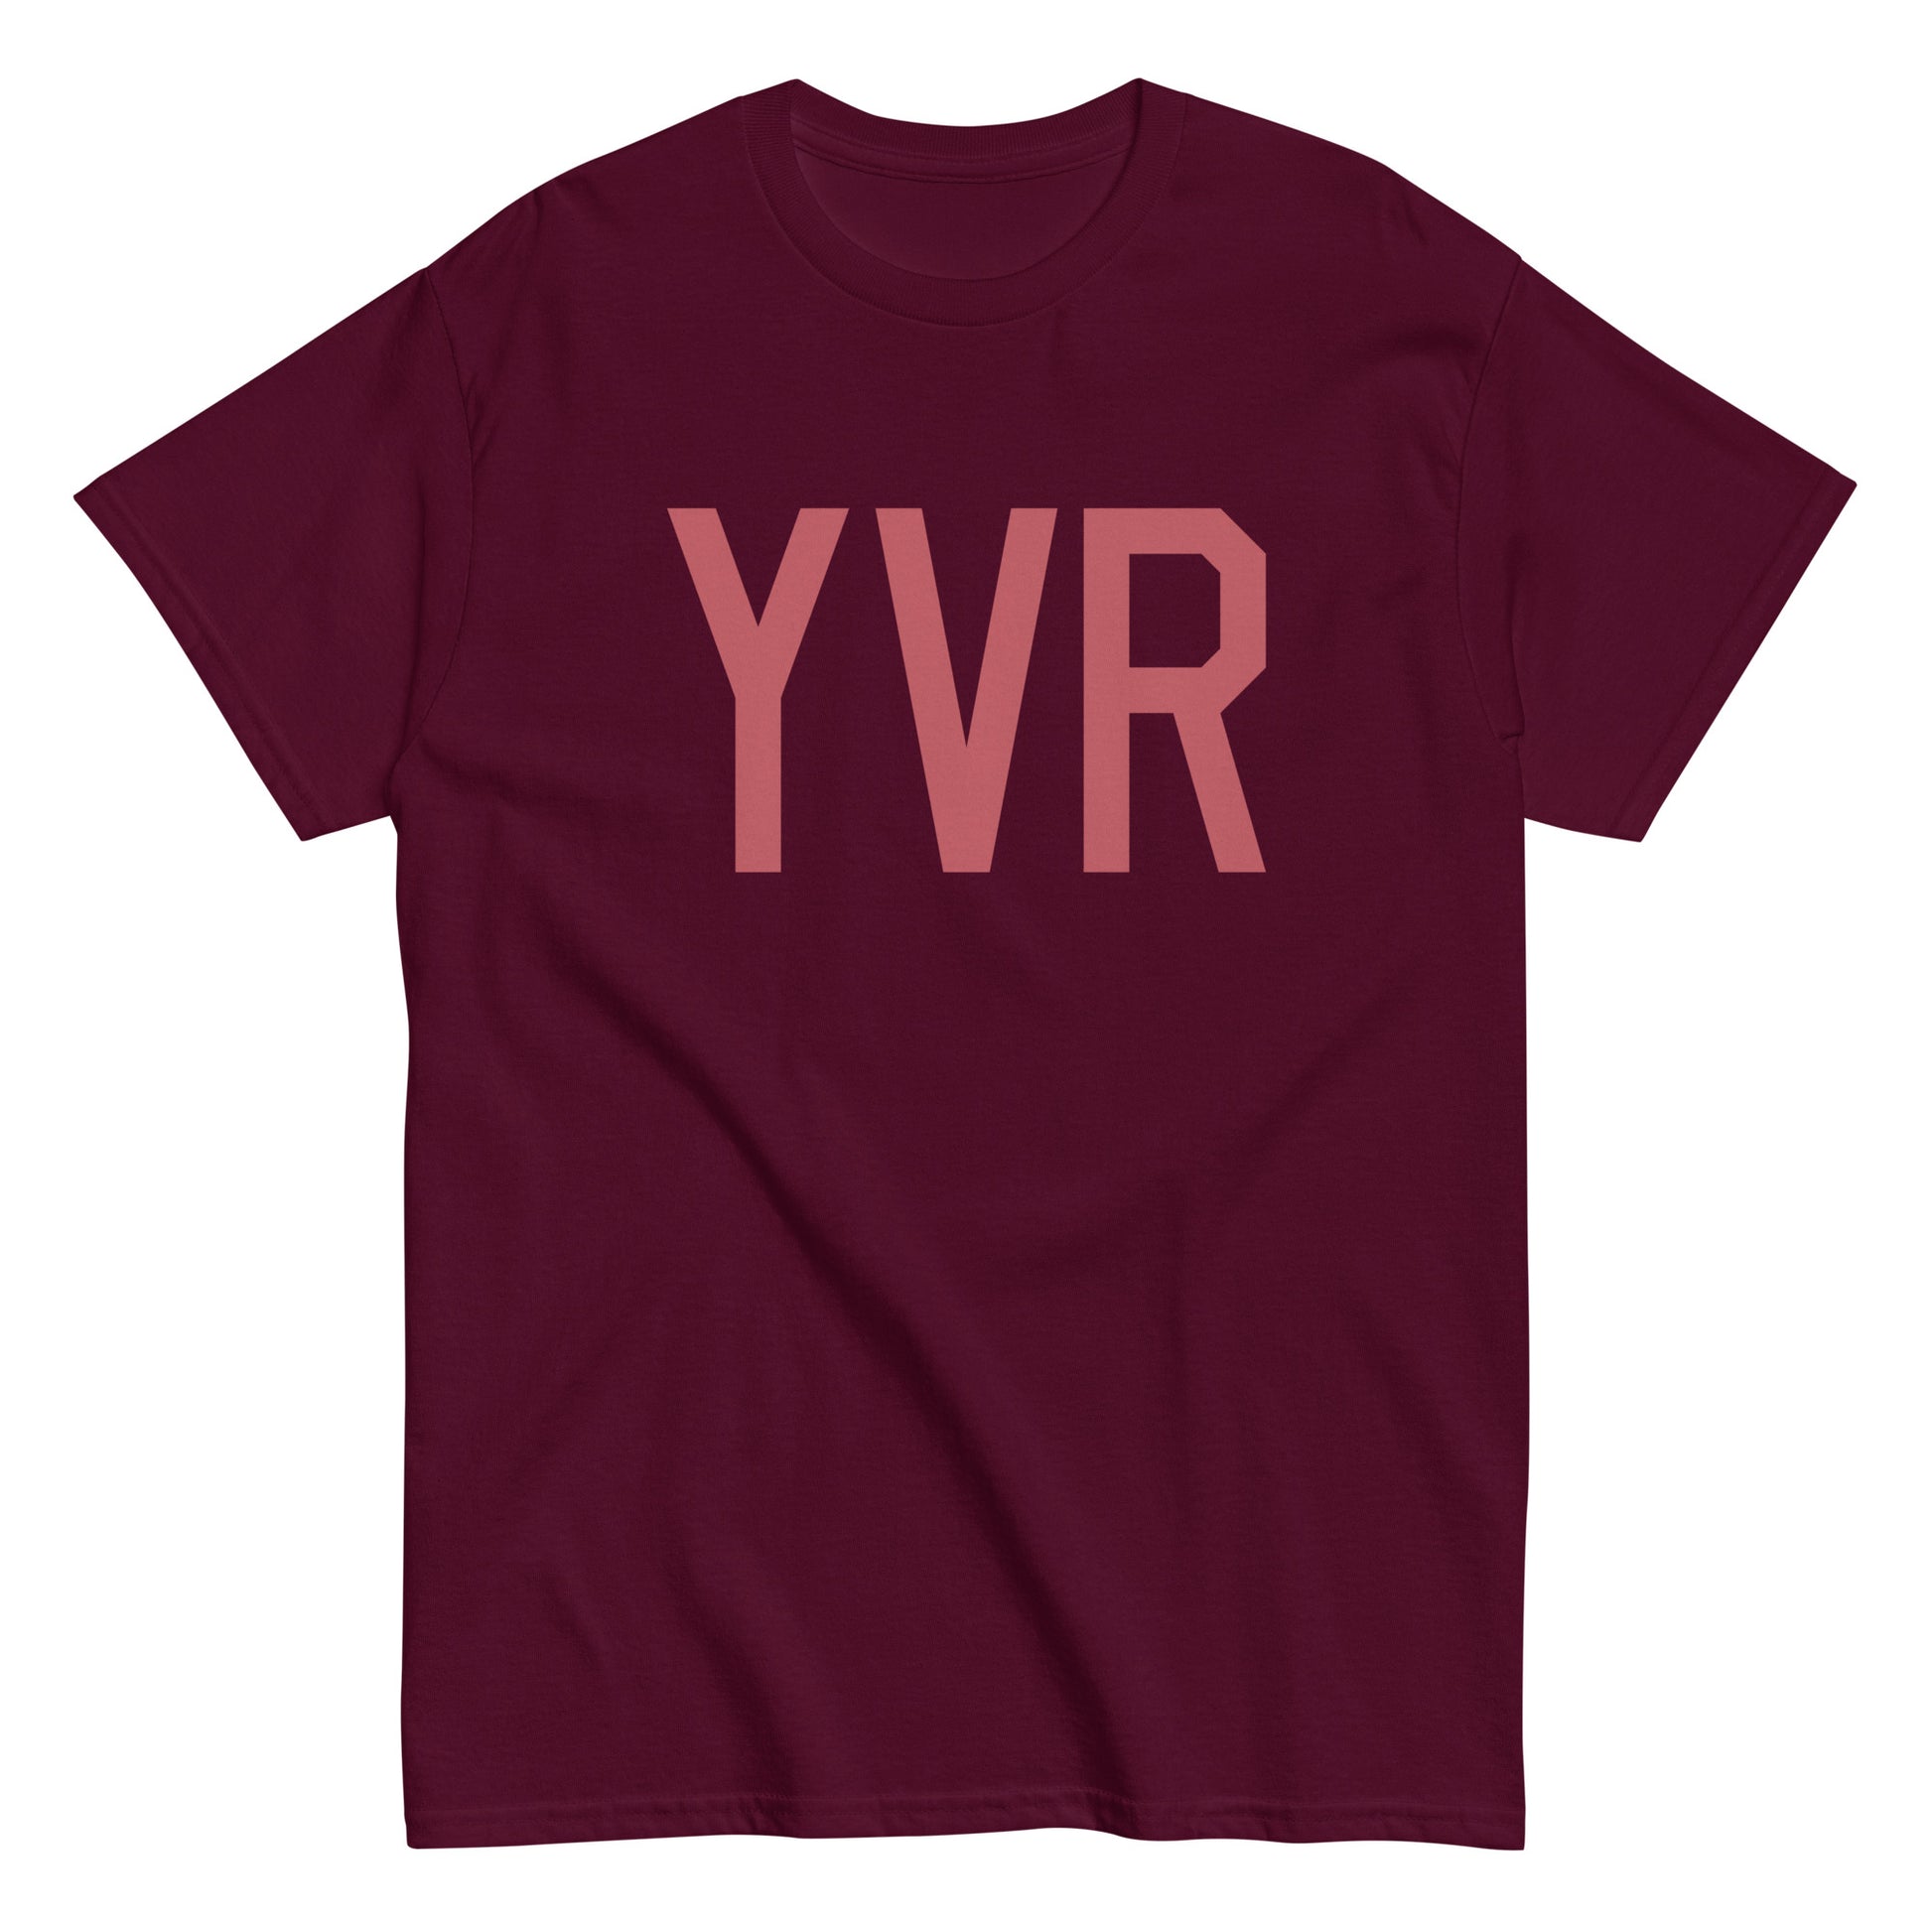 Aviation Enthusiast Men's Tee - Deep Pink Graphic • YVR Vancouver • YHM Designs - Image 01